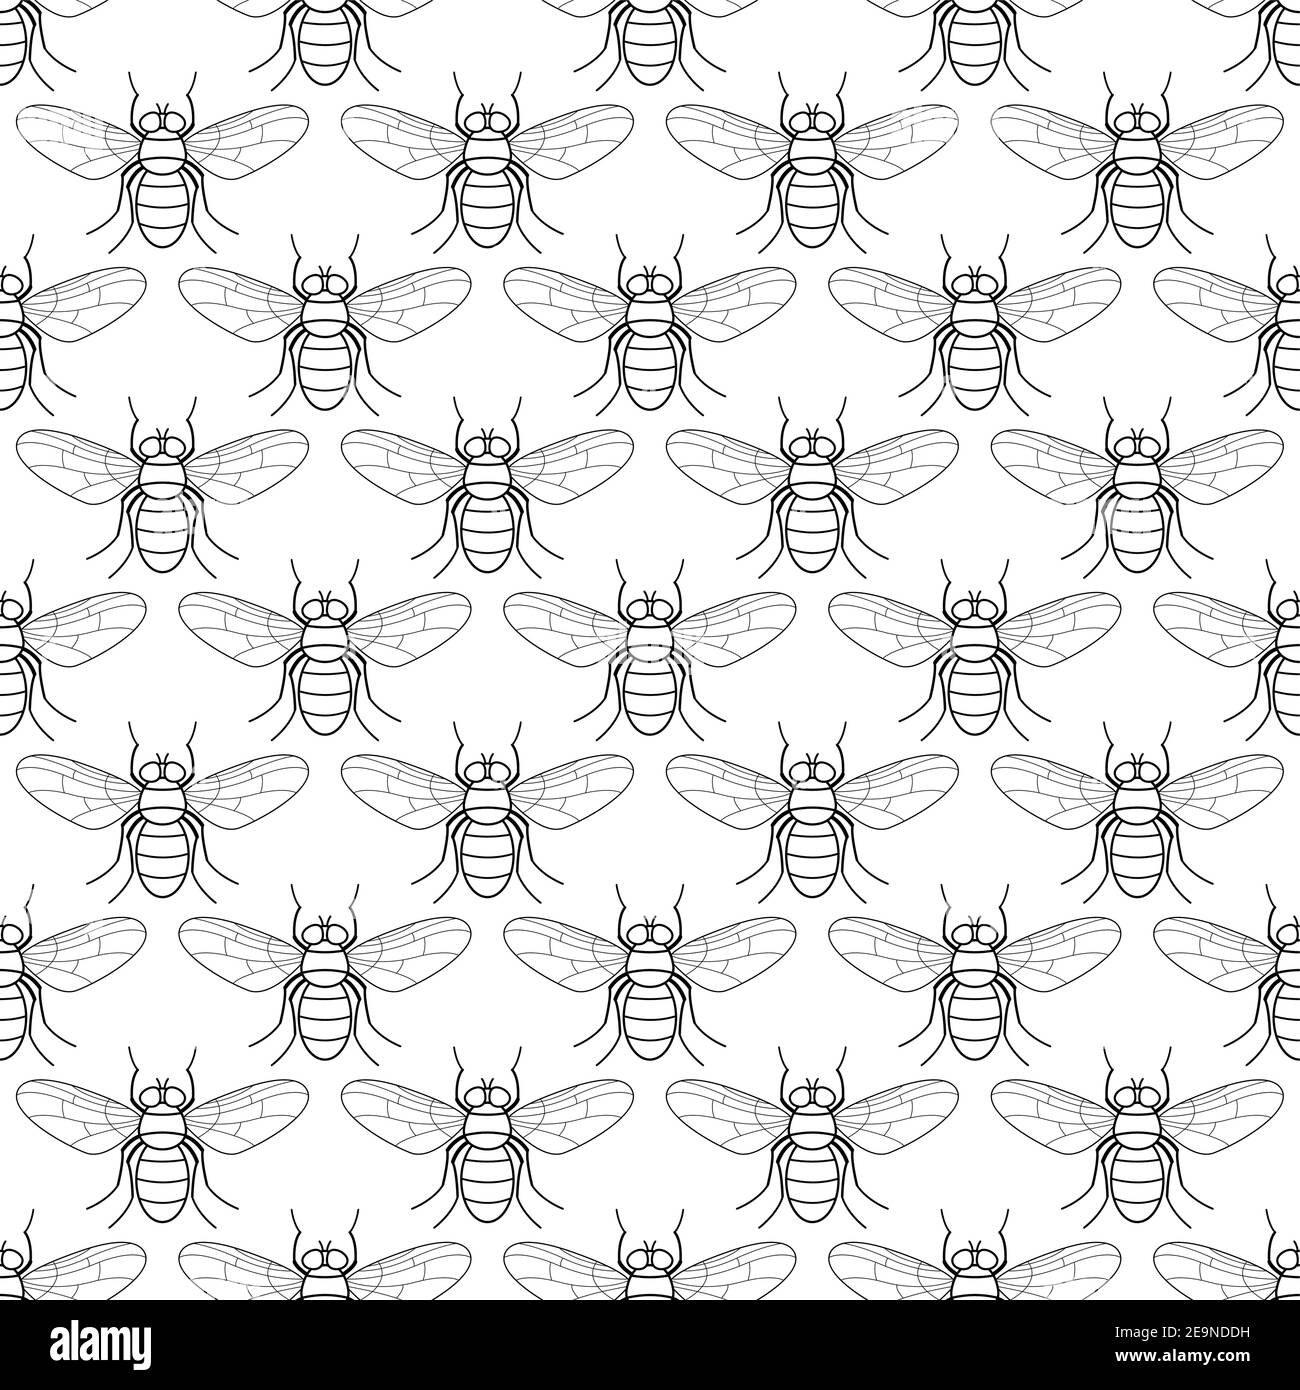 Seamless pattern of the contour fly insects Stock Vector